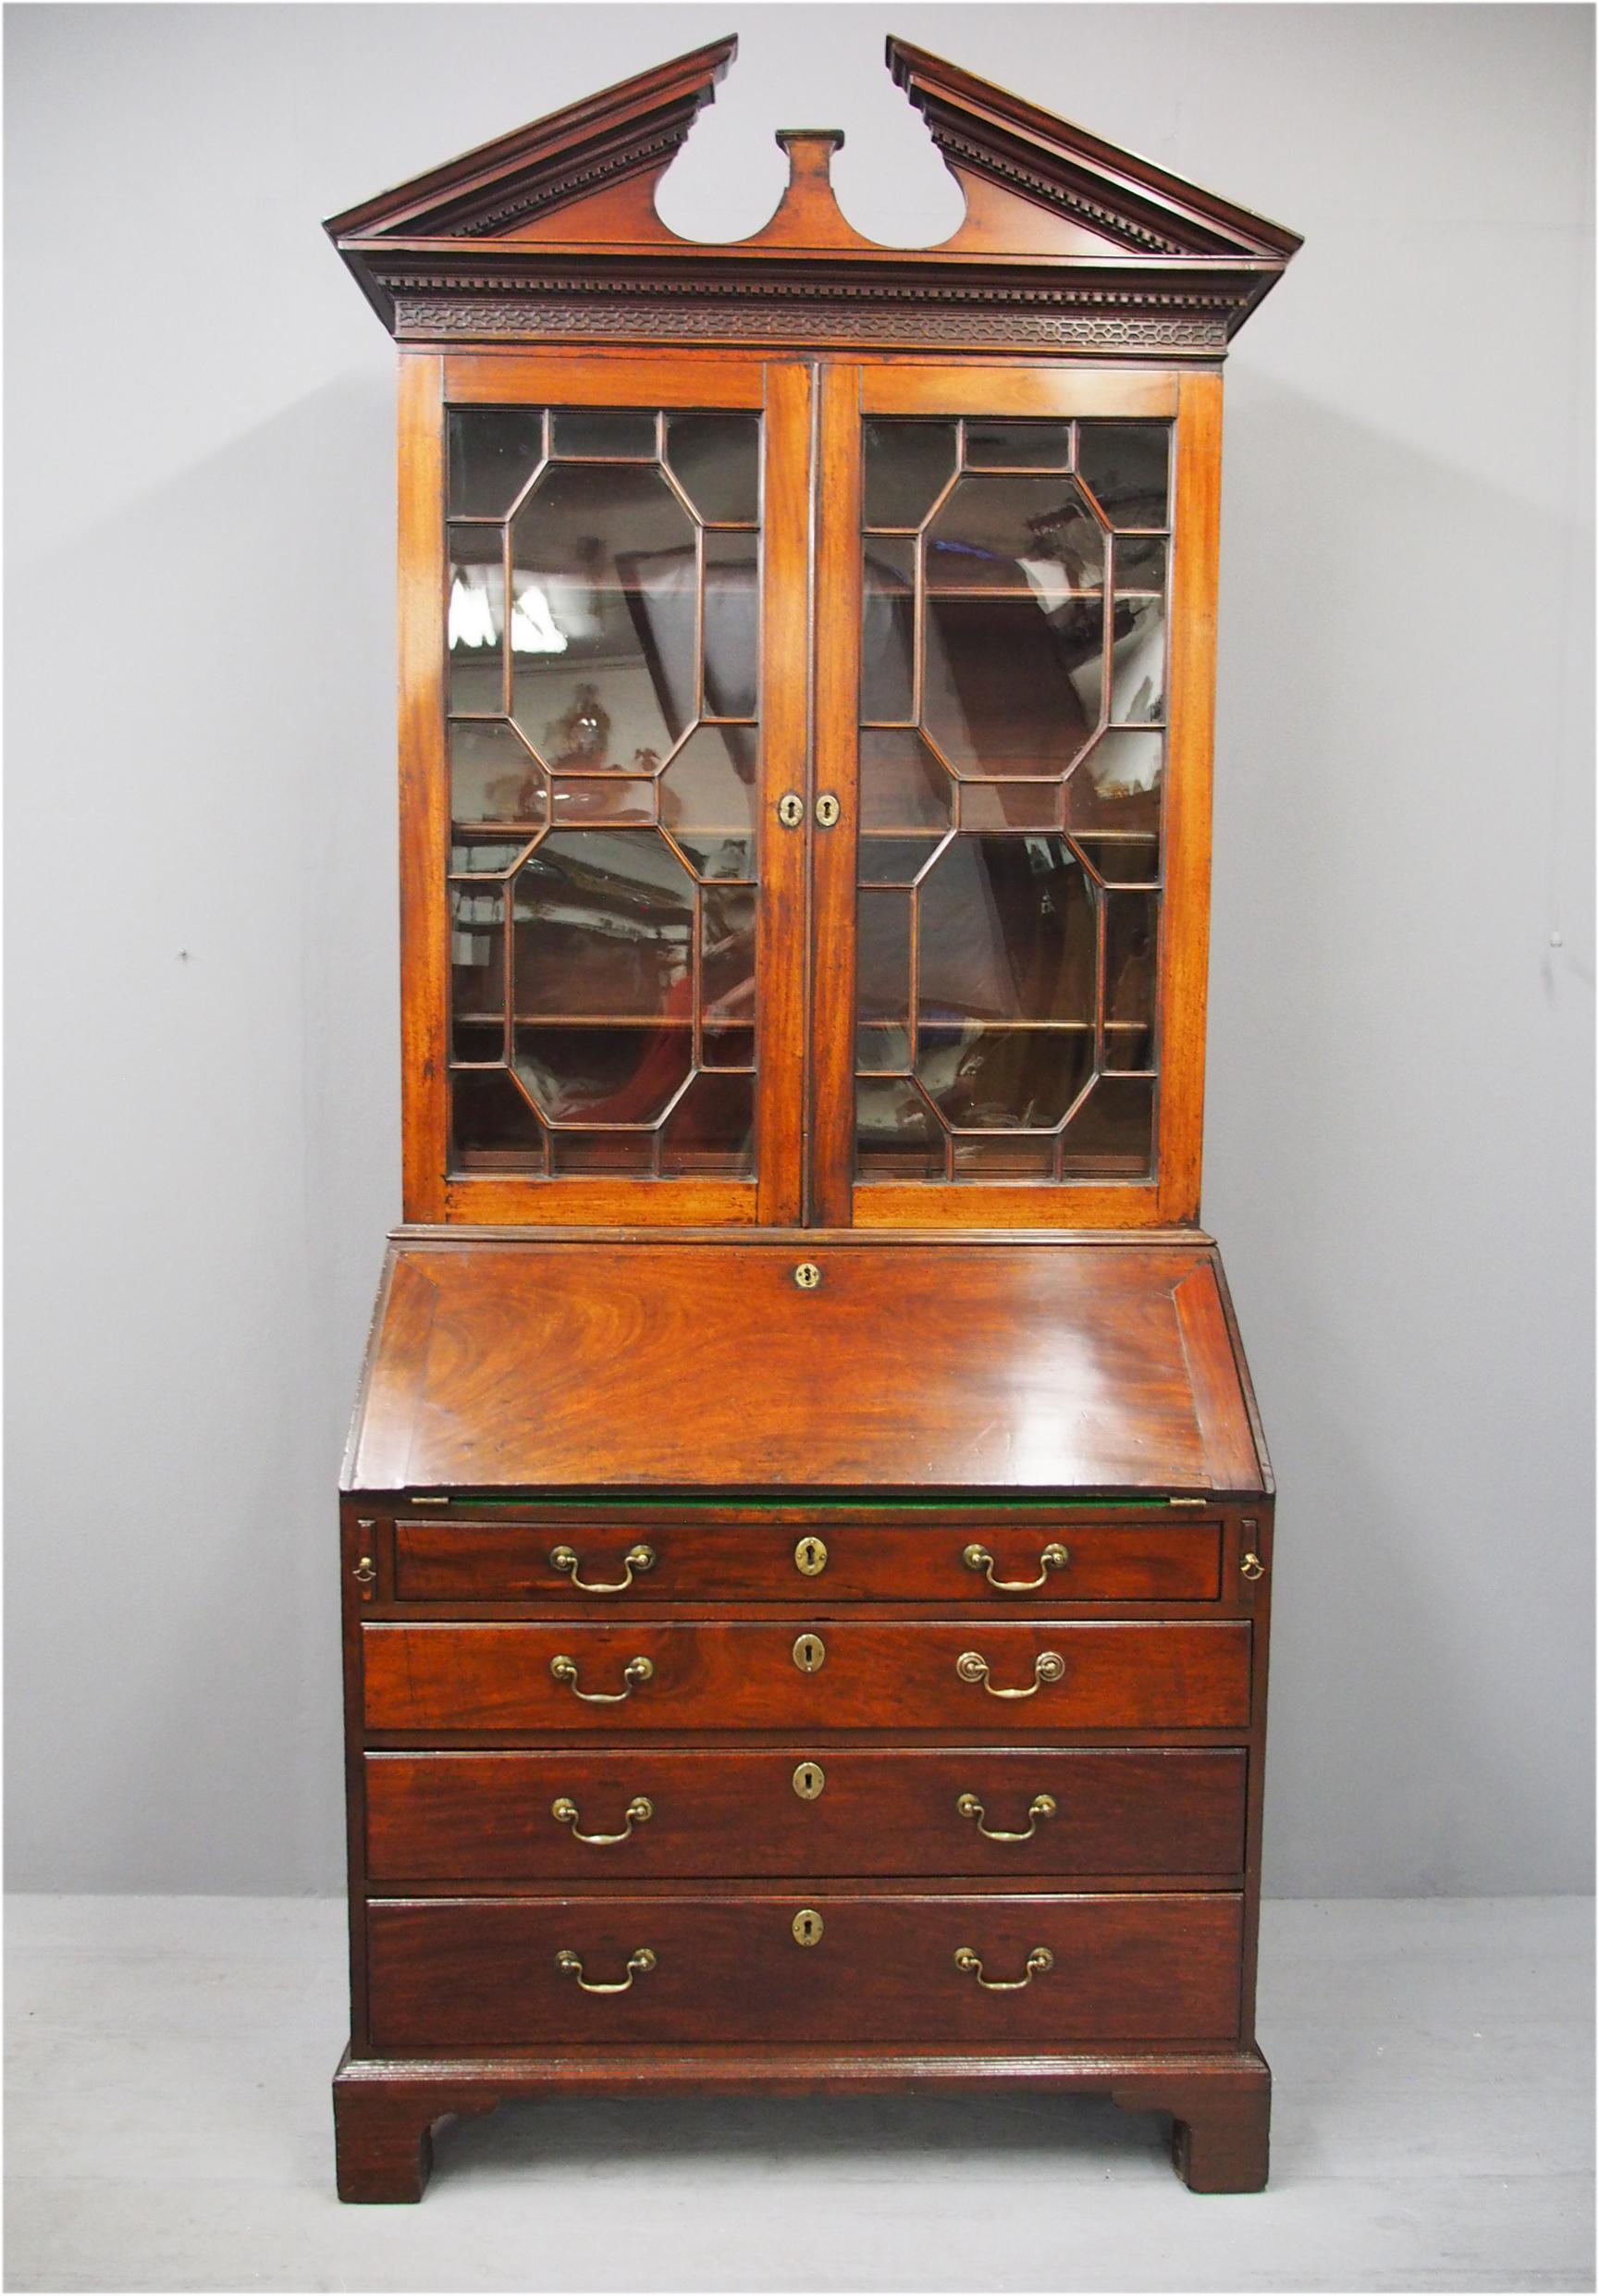 Early George III mahogany bureau bookcase, circa 1770. The moulded dentil cornice is surmounted by a ‘broken’ pediment over a blind fretwork frieze. The astragal glazed doors has original glazing and glazing bars and inside are sliding adjustable